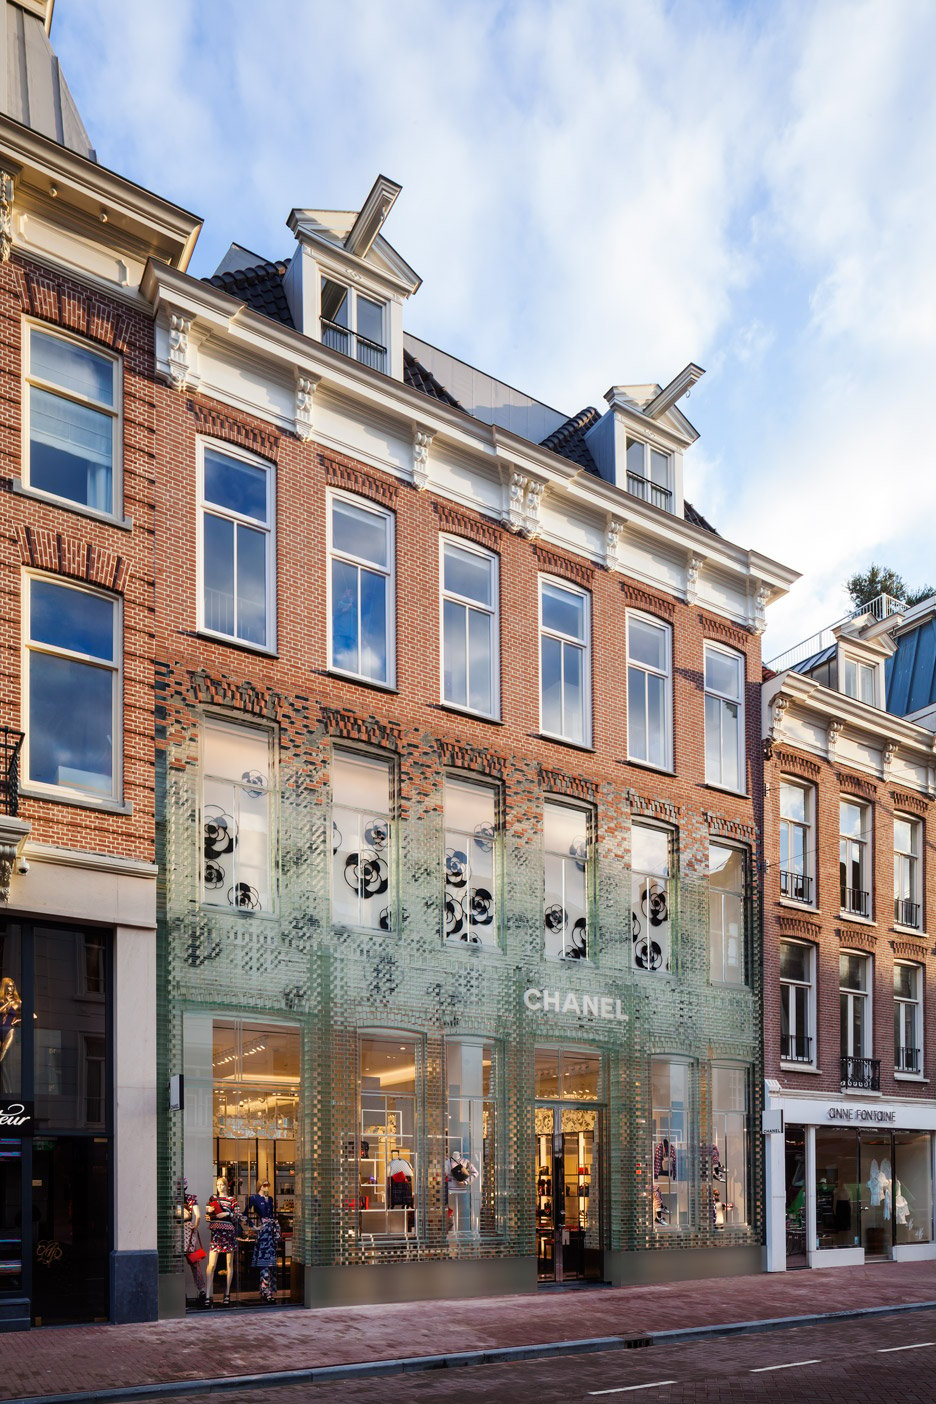 MVRDV replaces traditional facade with glass bricks that are stronger than  concrete